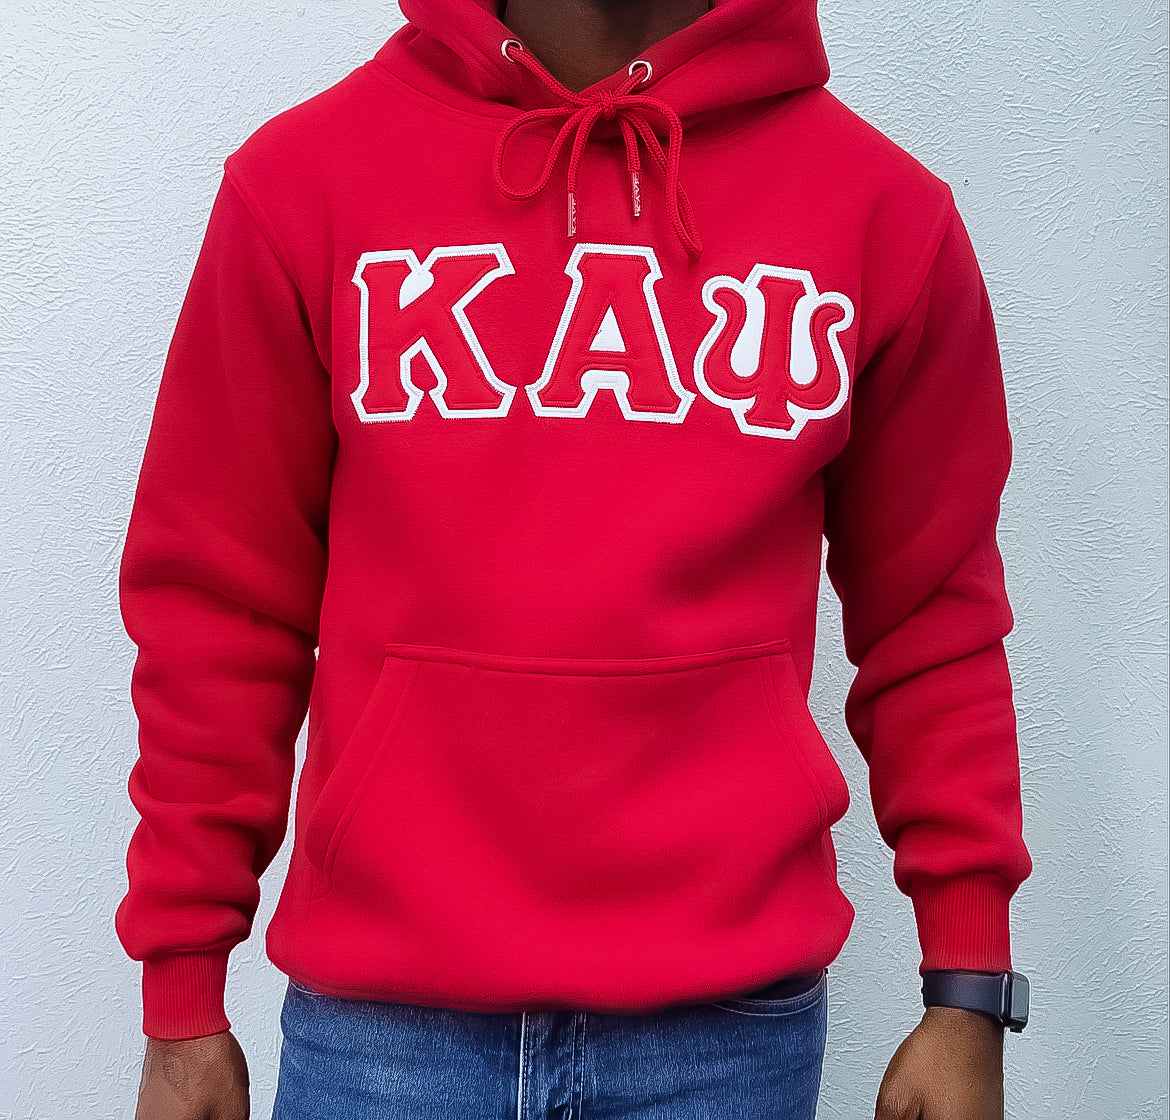 Crafted from high-quality materials, this hoodie is perfect for a brisk jog or a day out with friends. The Kappa Alpha Psi logo is prominently displayed, showcasing your affiliation with this renowned fraternity. Ideal for Nupes who want to look stylish without compromising on comfort, this hoodie is the perfect addition to your wardrobe.